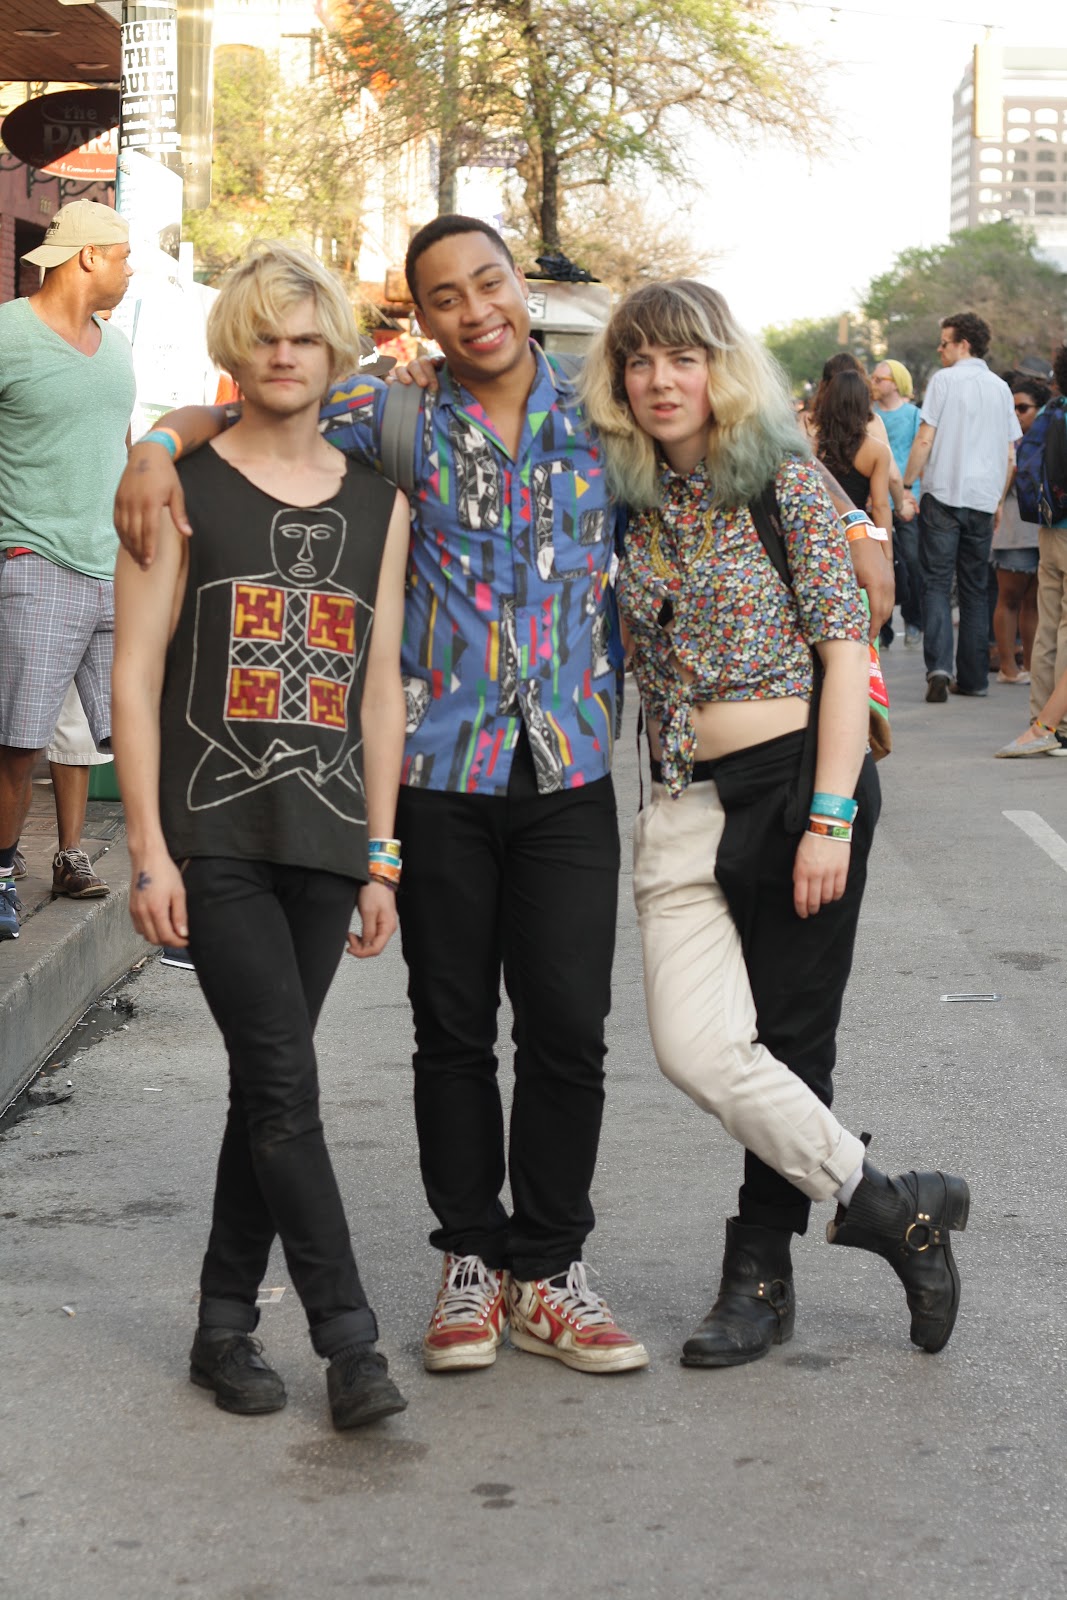 three friends with funky style at sxsw music festival